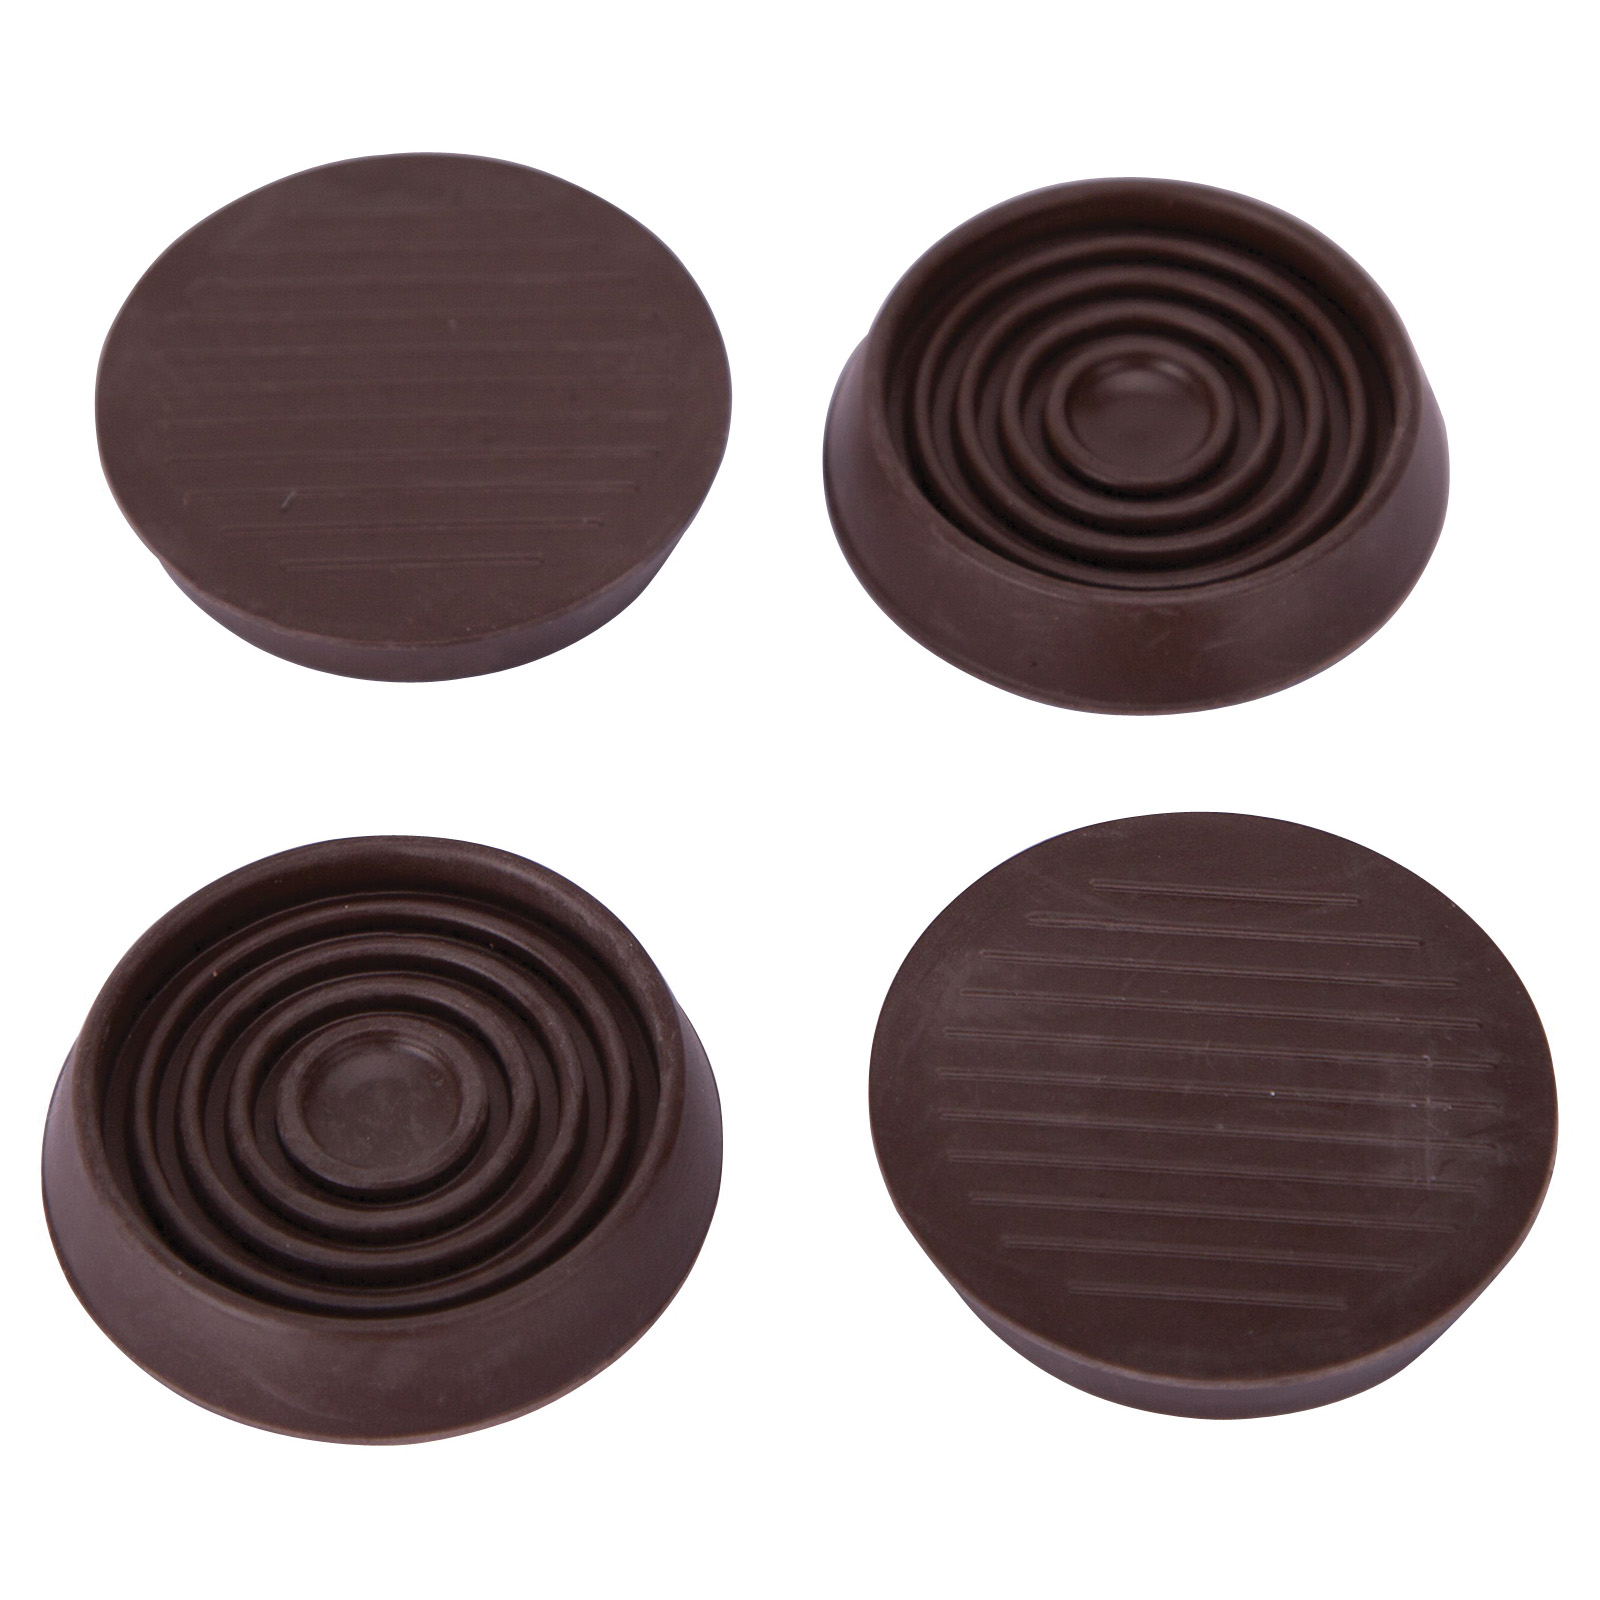 FE-S709-PS Caster Furniture Glide, Rubber, Brown, Brown, 2-5/32 x 2-5/32 x 15/32 in Dimensions